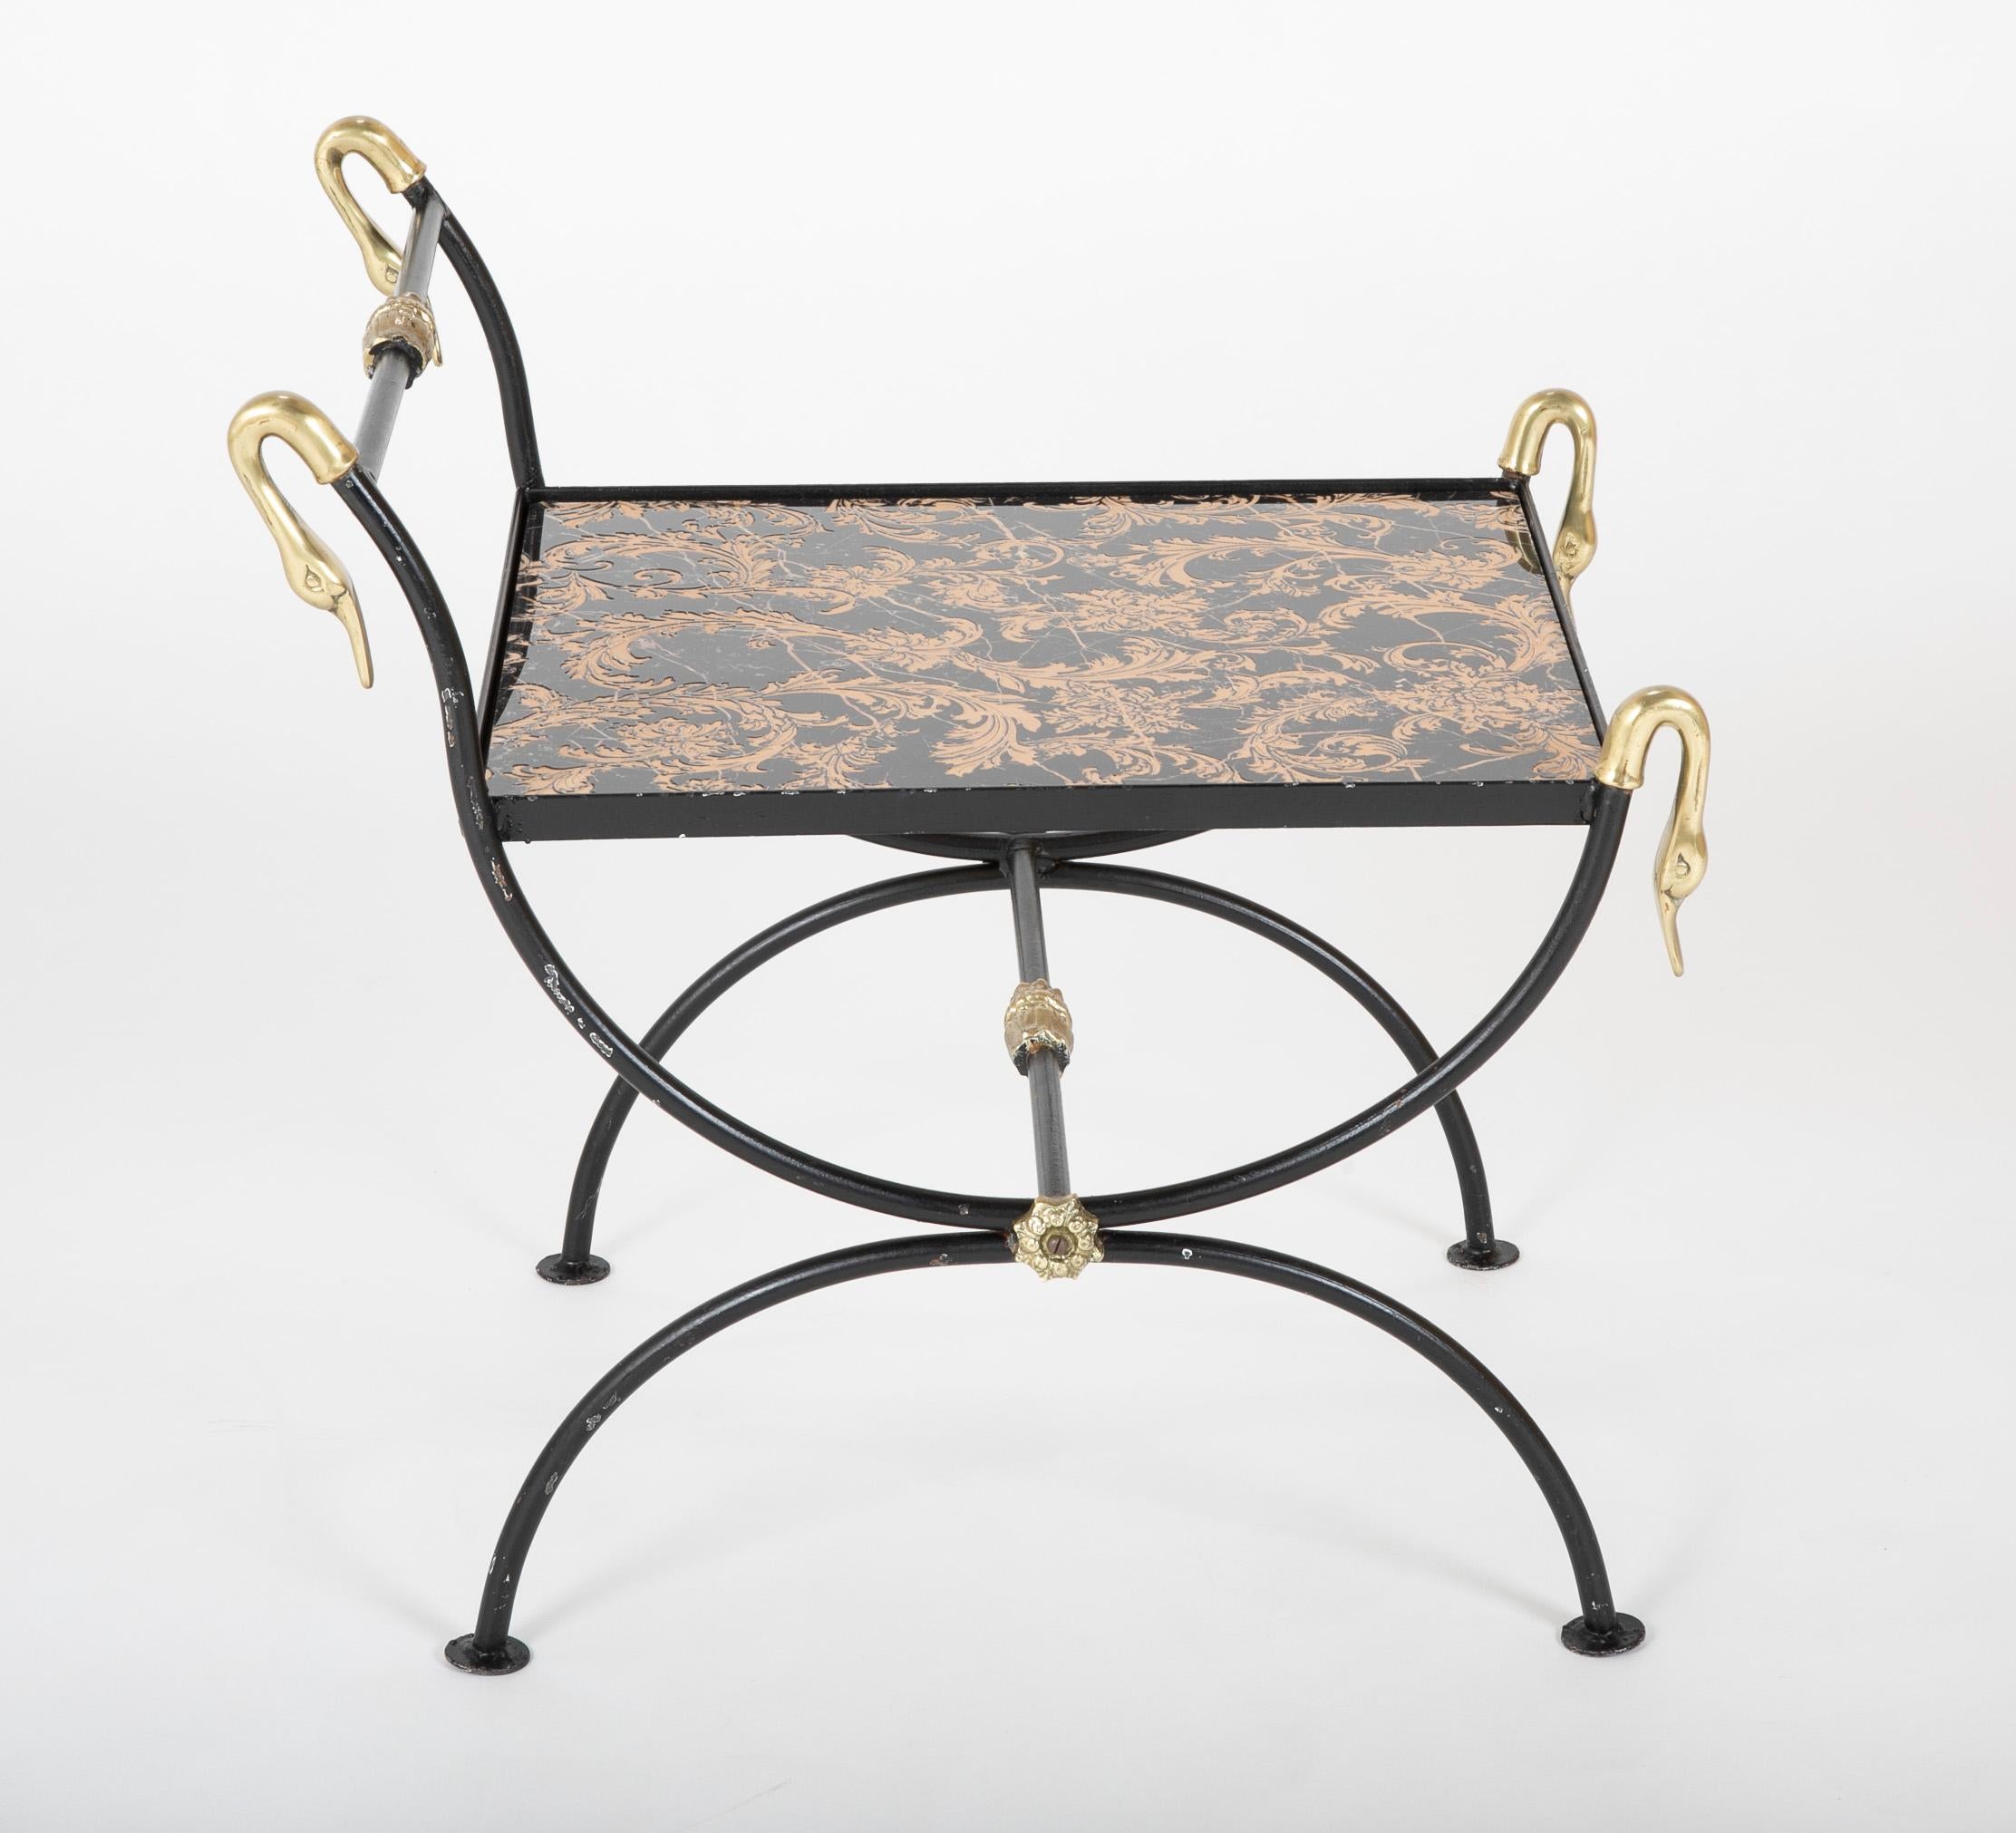 Three Piece Iron and Brass Coffee Table with Versace Insets 7